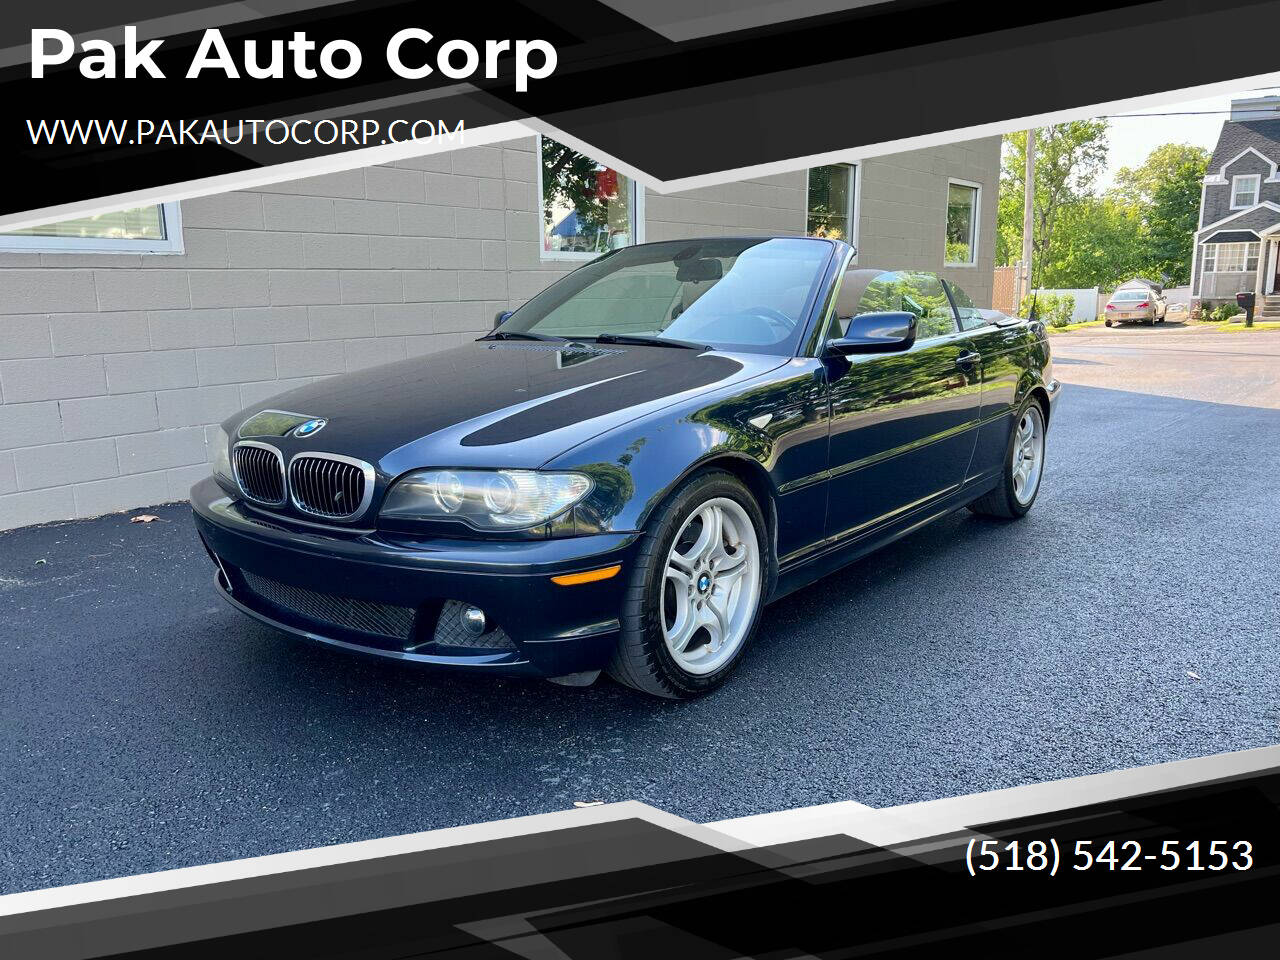 2006 BMW 3 Series For Sale In Schenectady, NY - ®